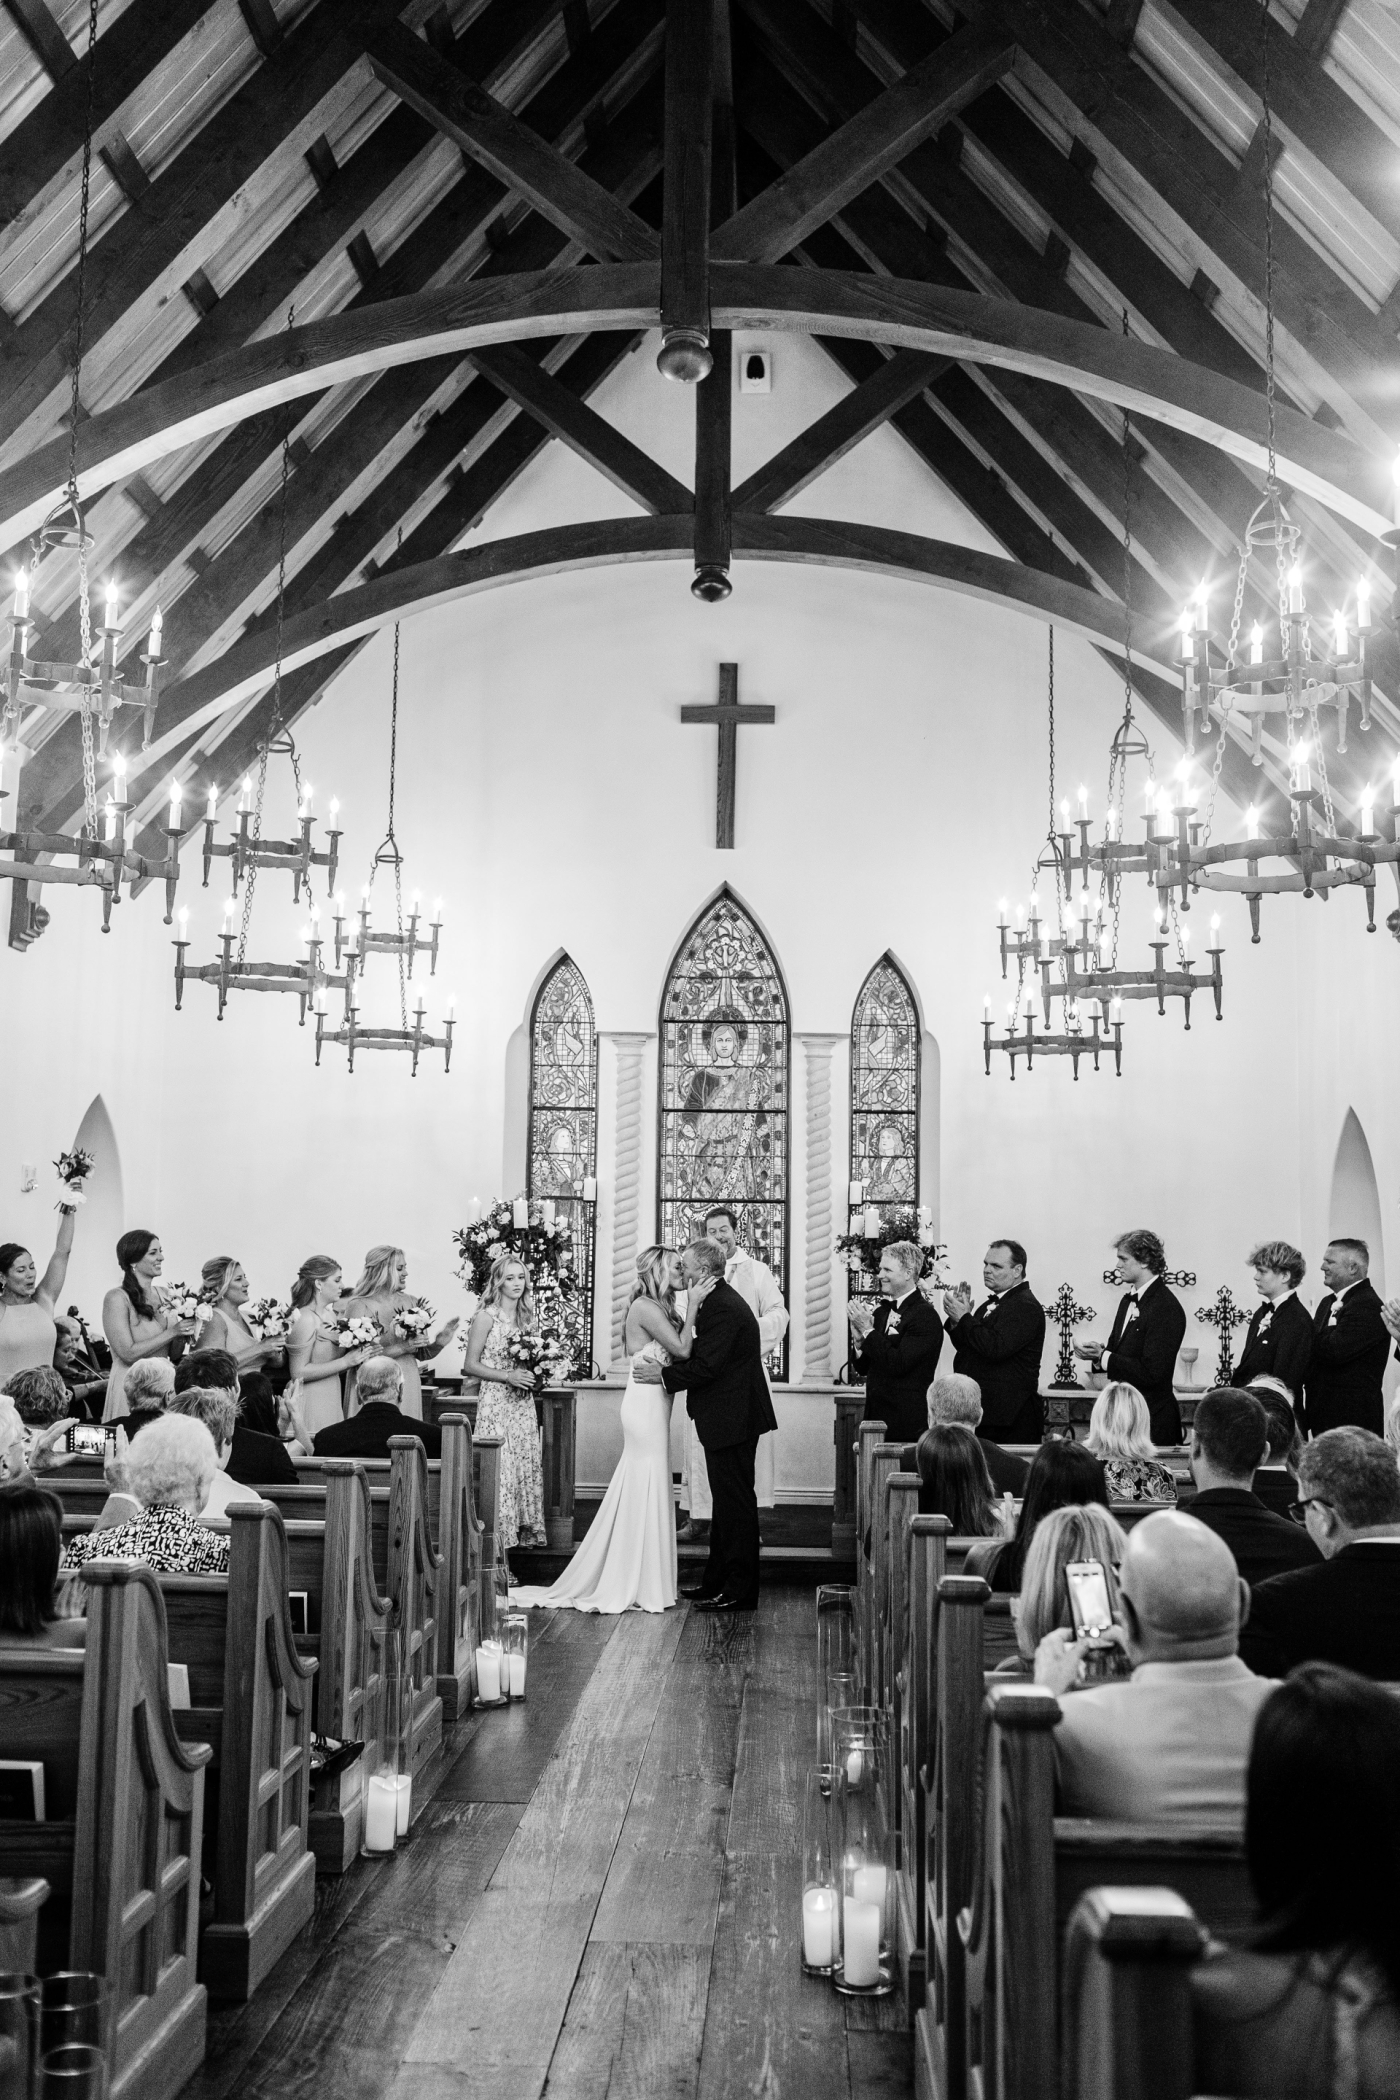 Wedding ceremony at The Cloister Chapel